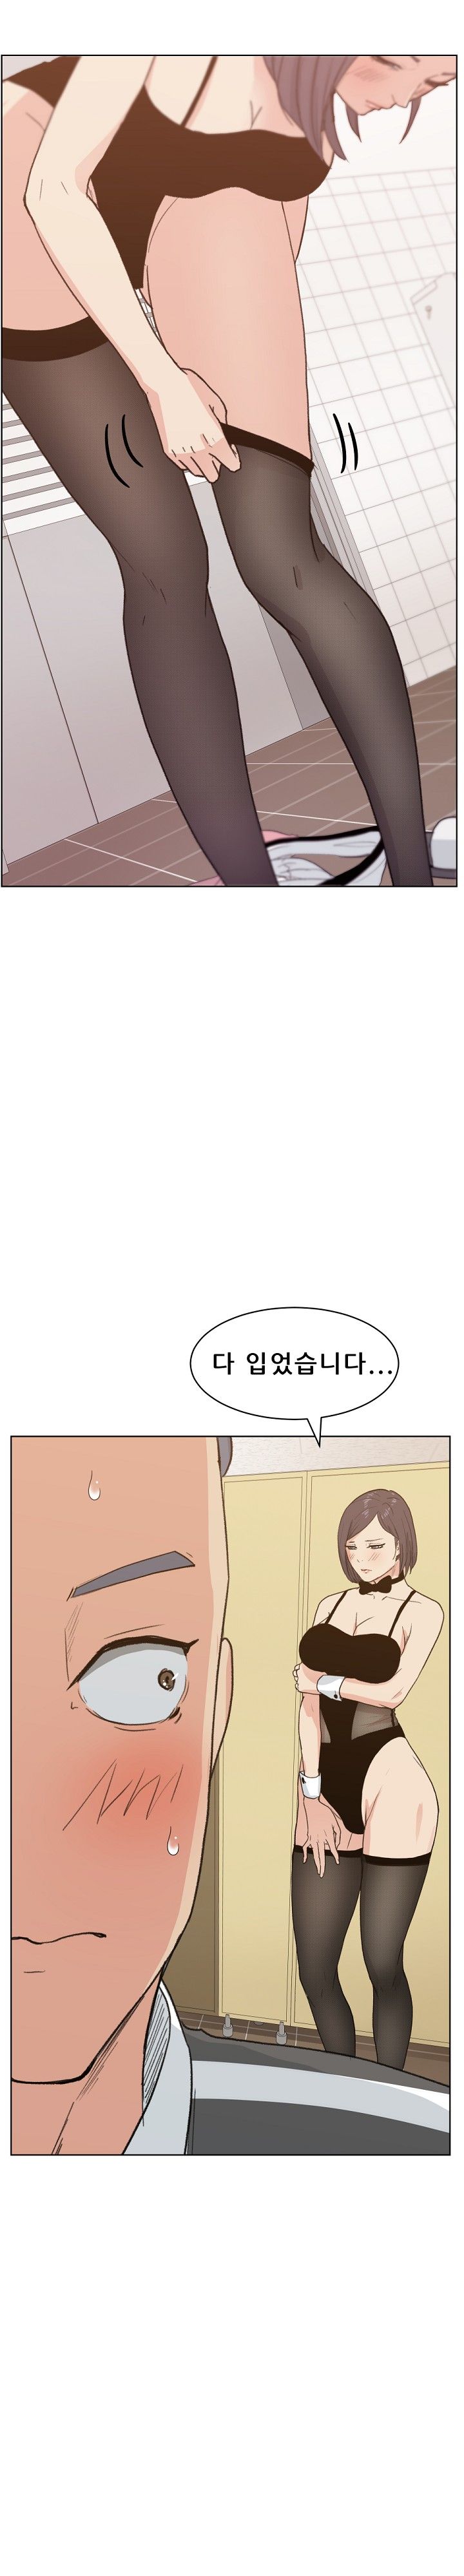 Sooyung Comic Shop Raw - Chapter 4 Page 10